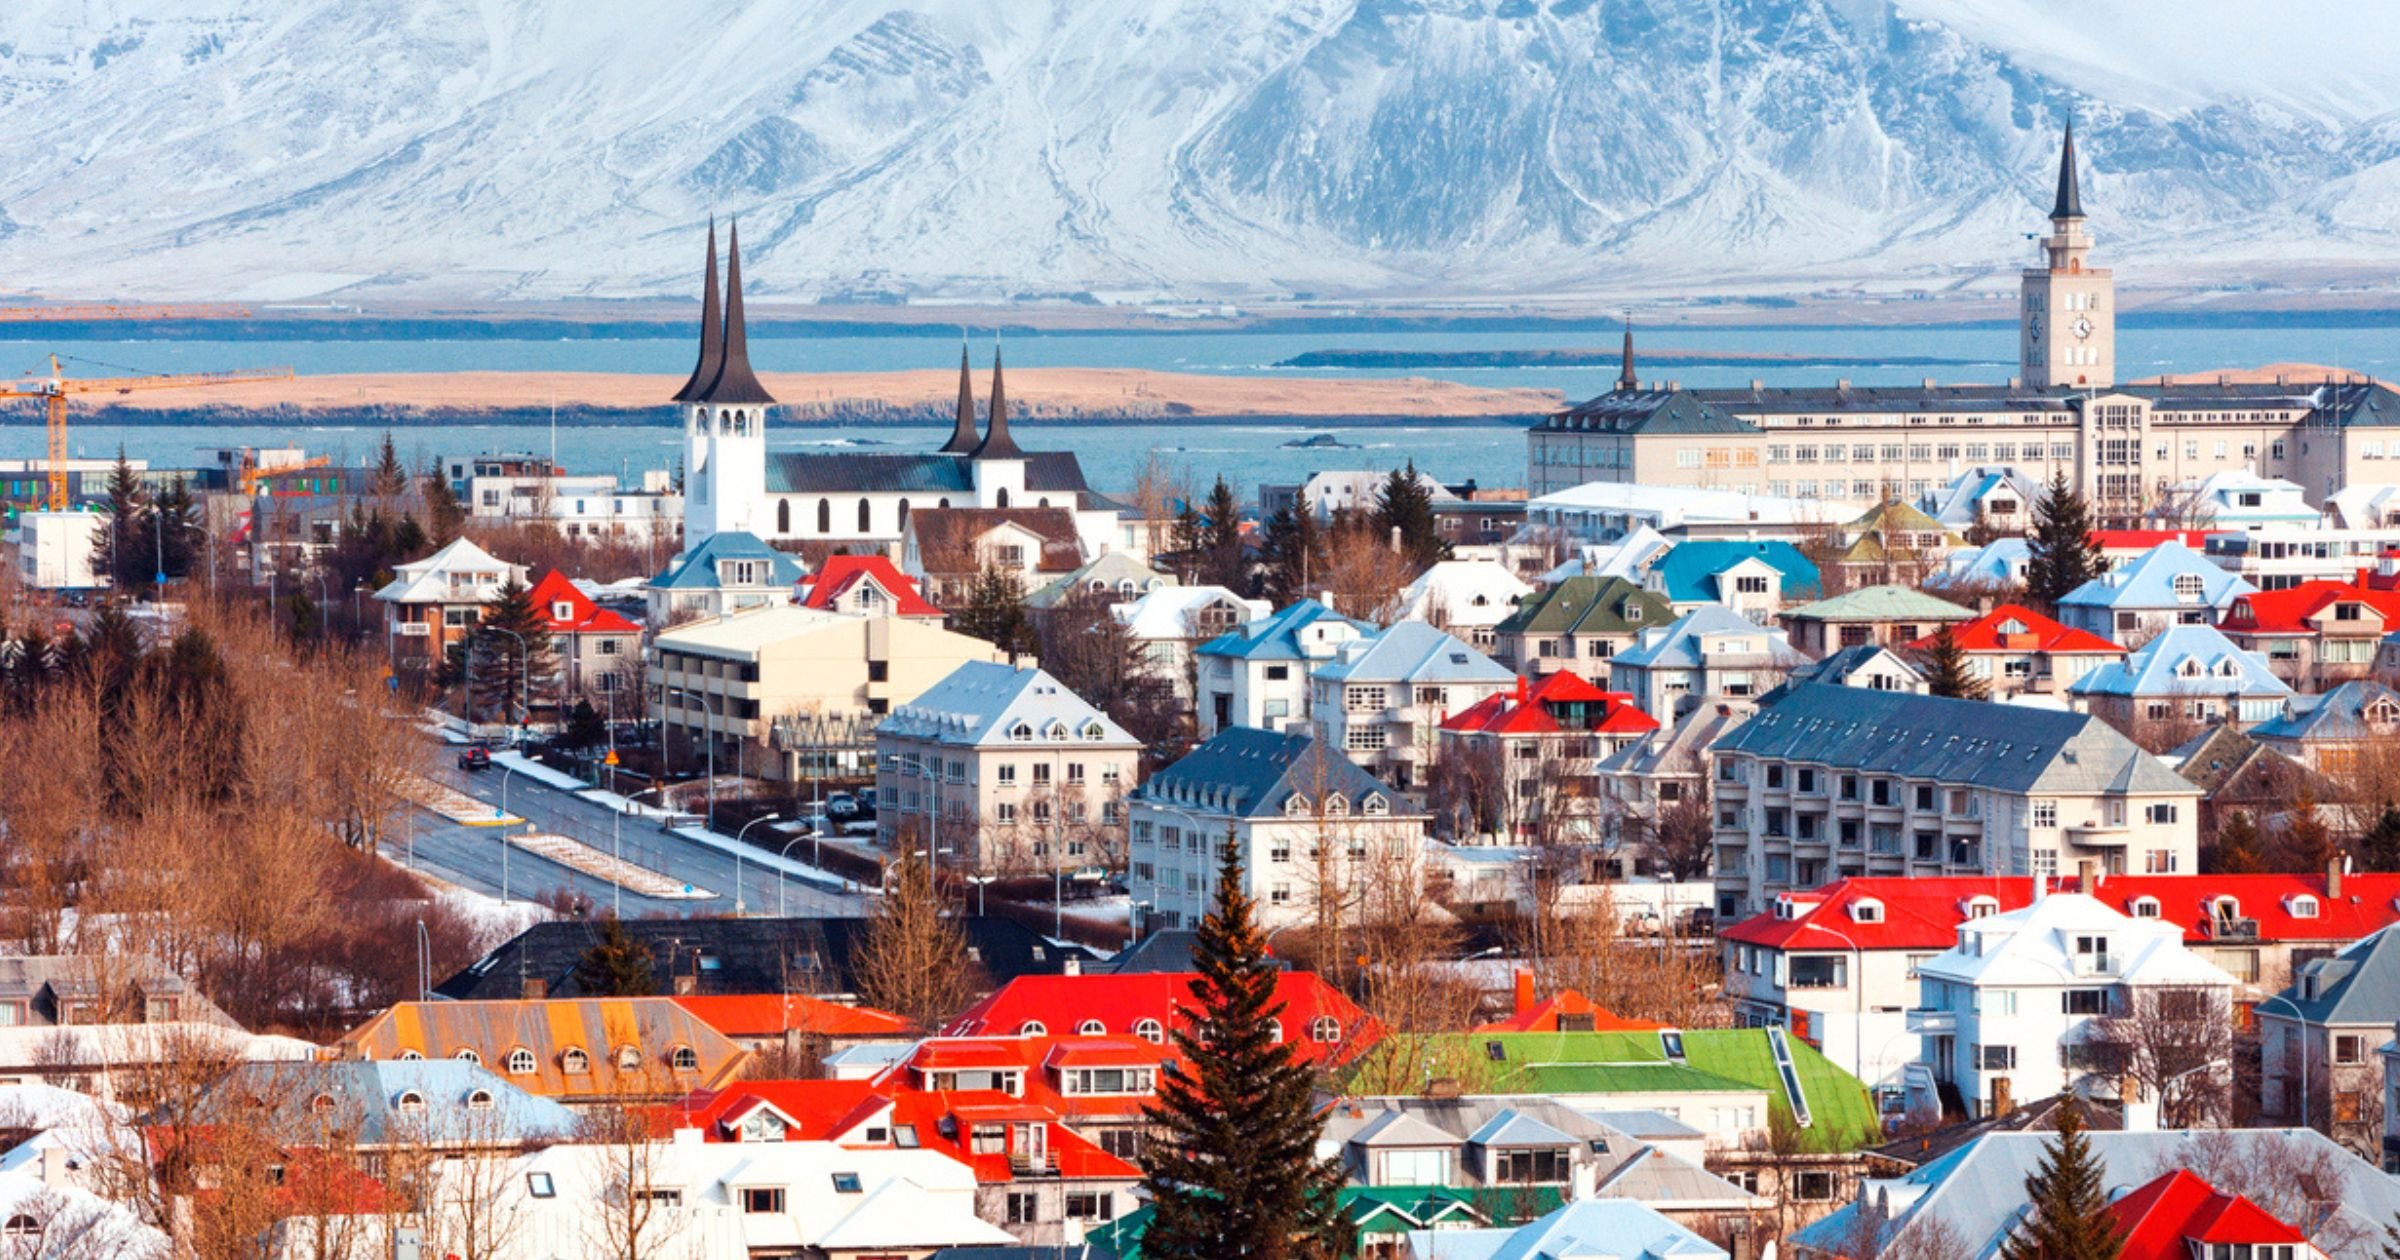 Rows of red roofs in Reykjavik city with mountains in the background